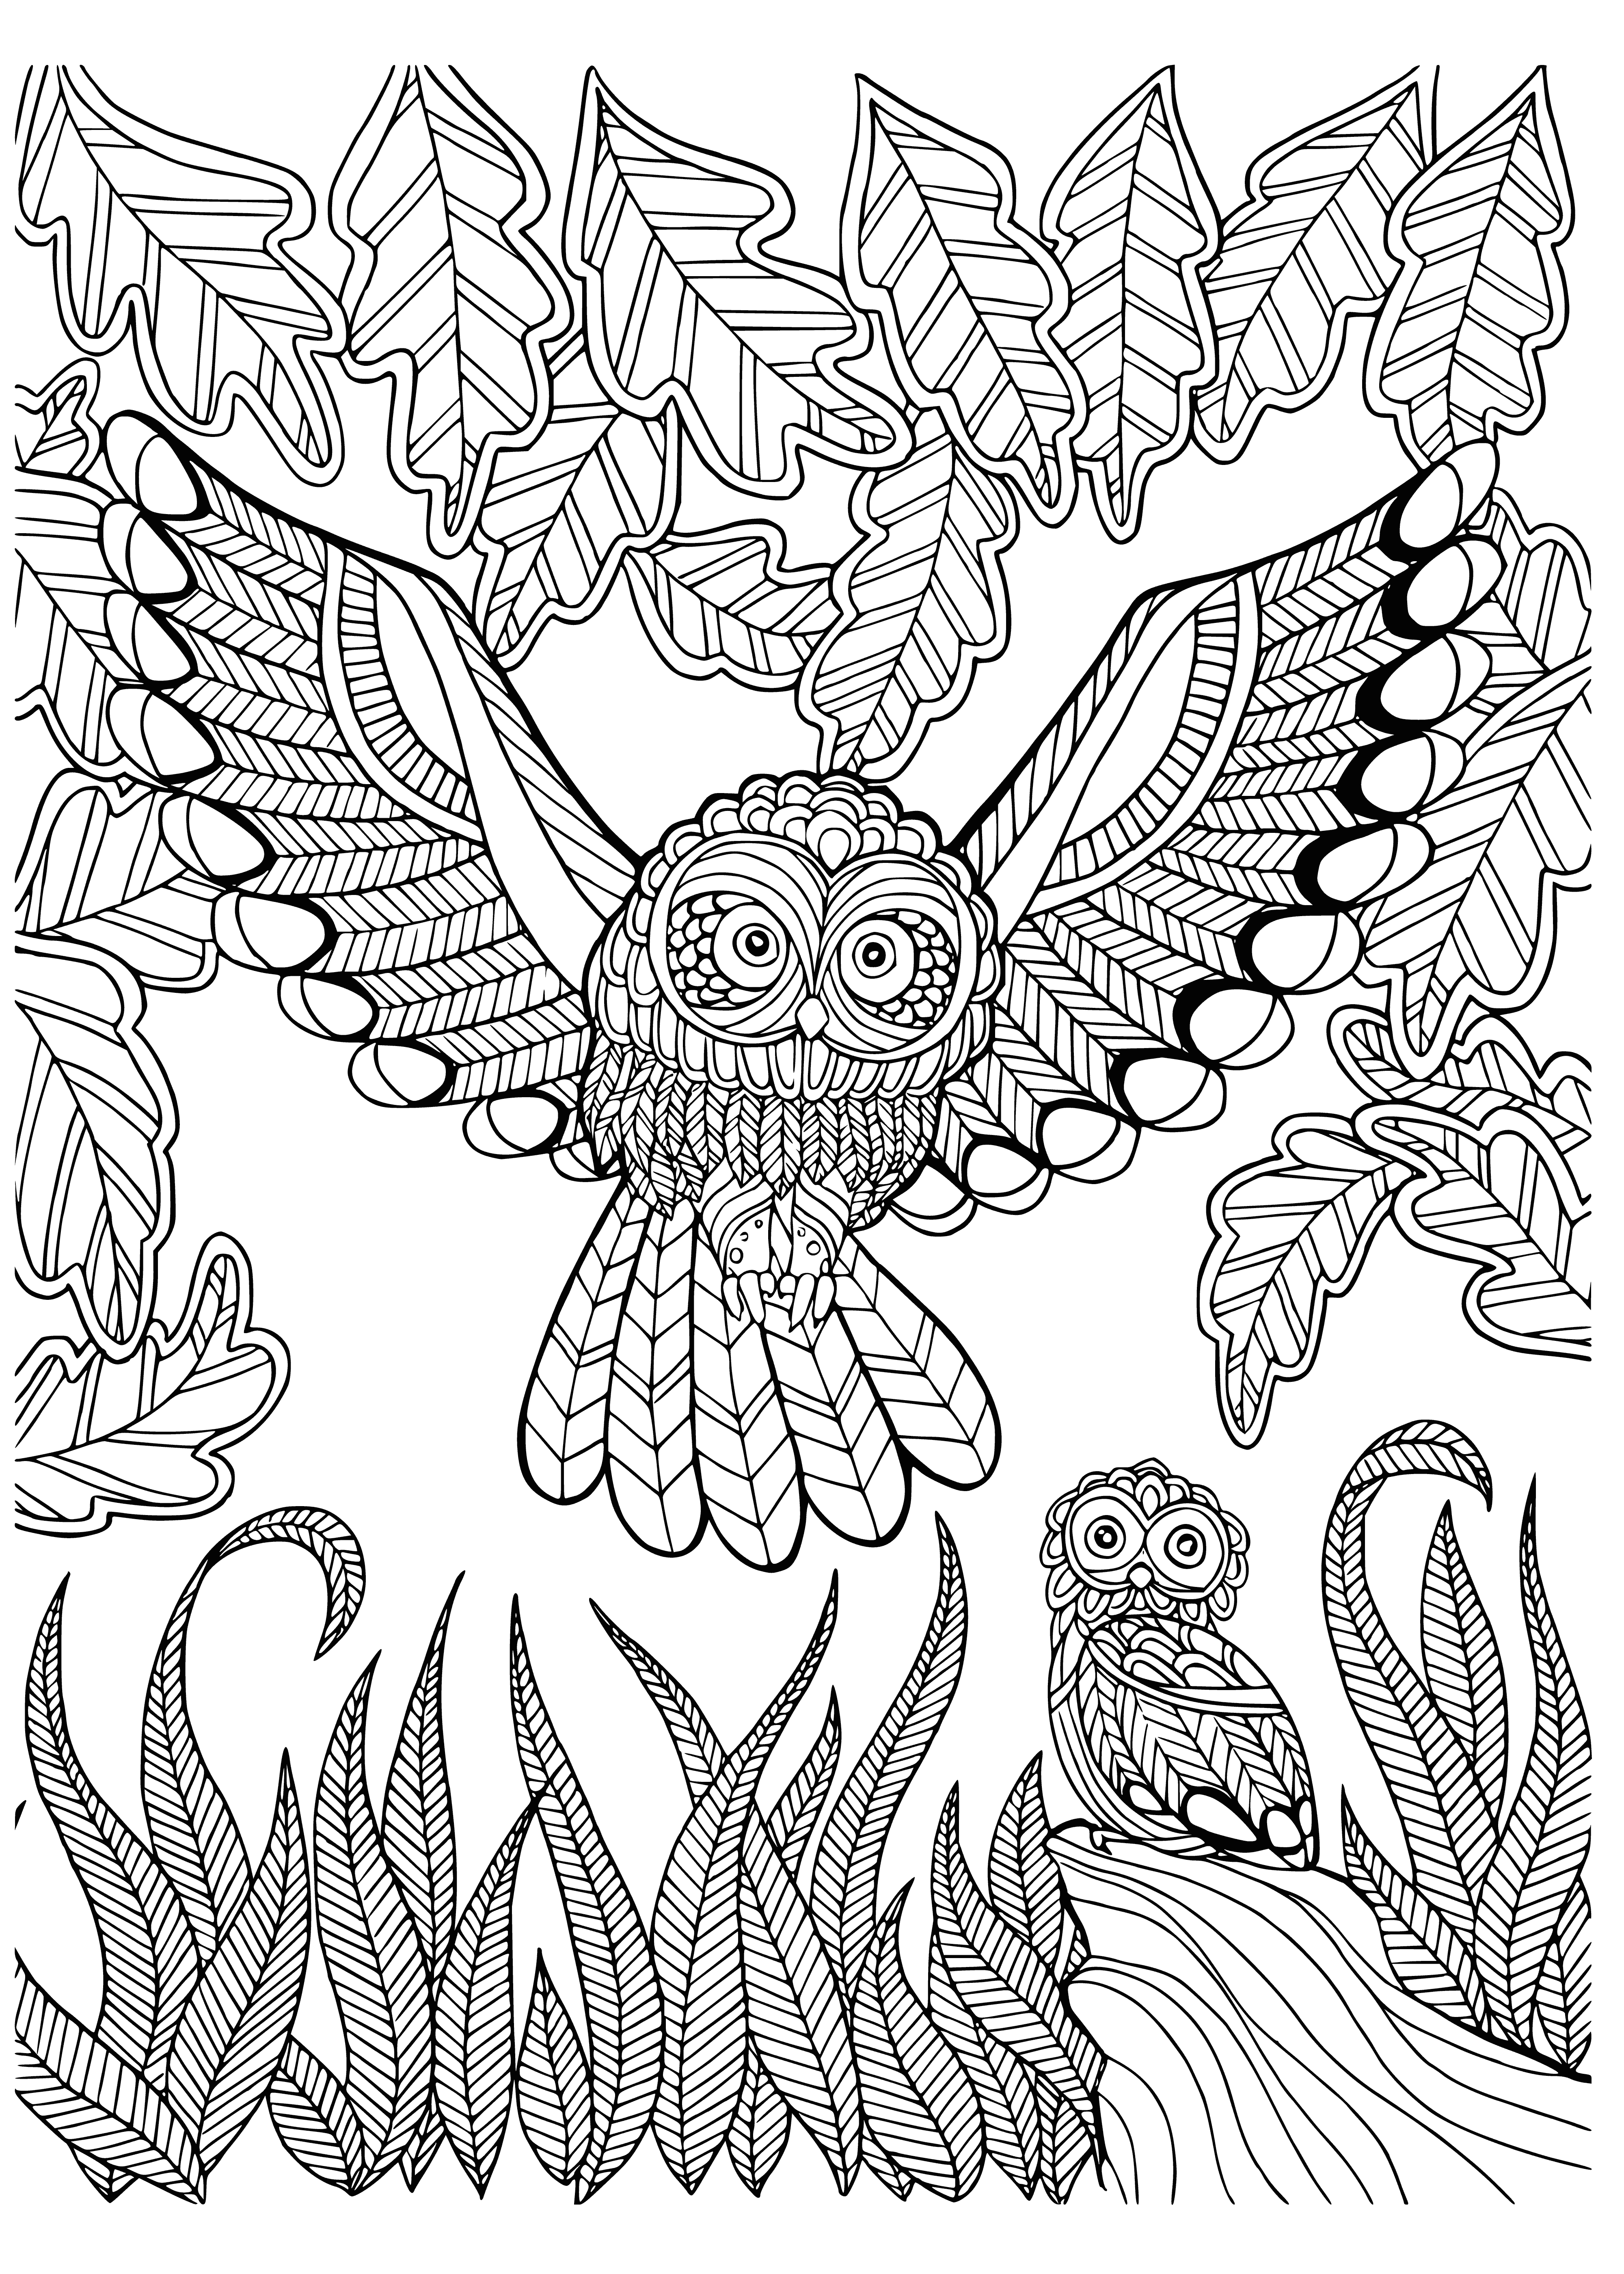 coloring page: Mother owl and owlet on tree branch in forest; mother looks down with love, owlet looks up with curiosity.